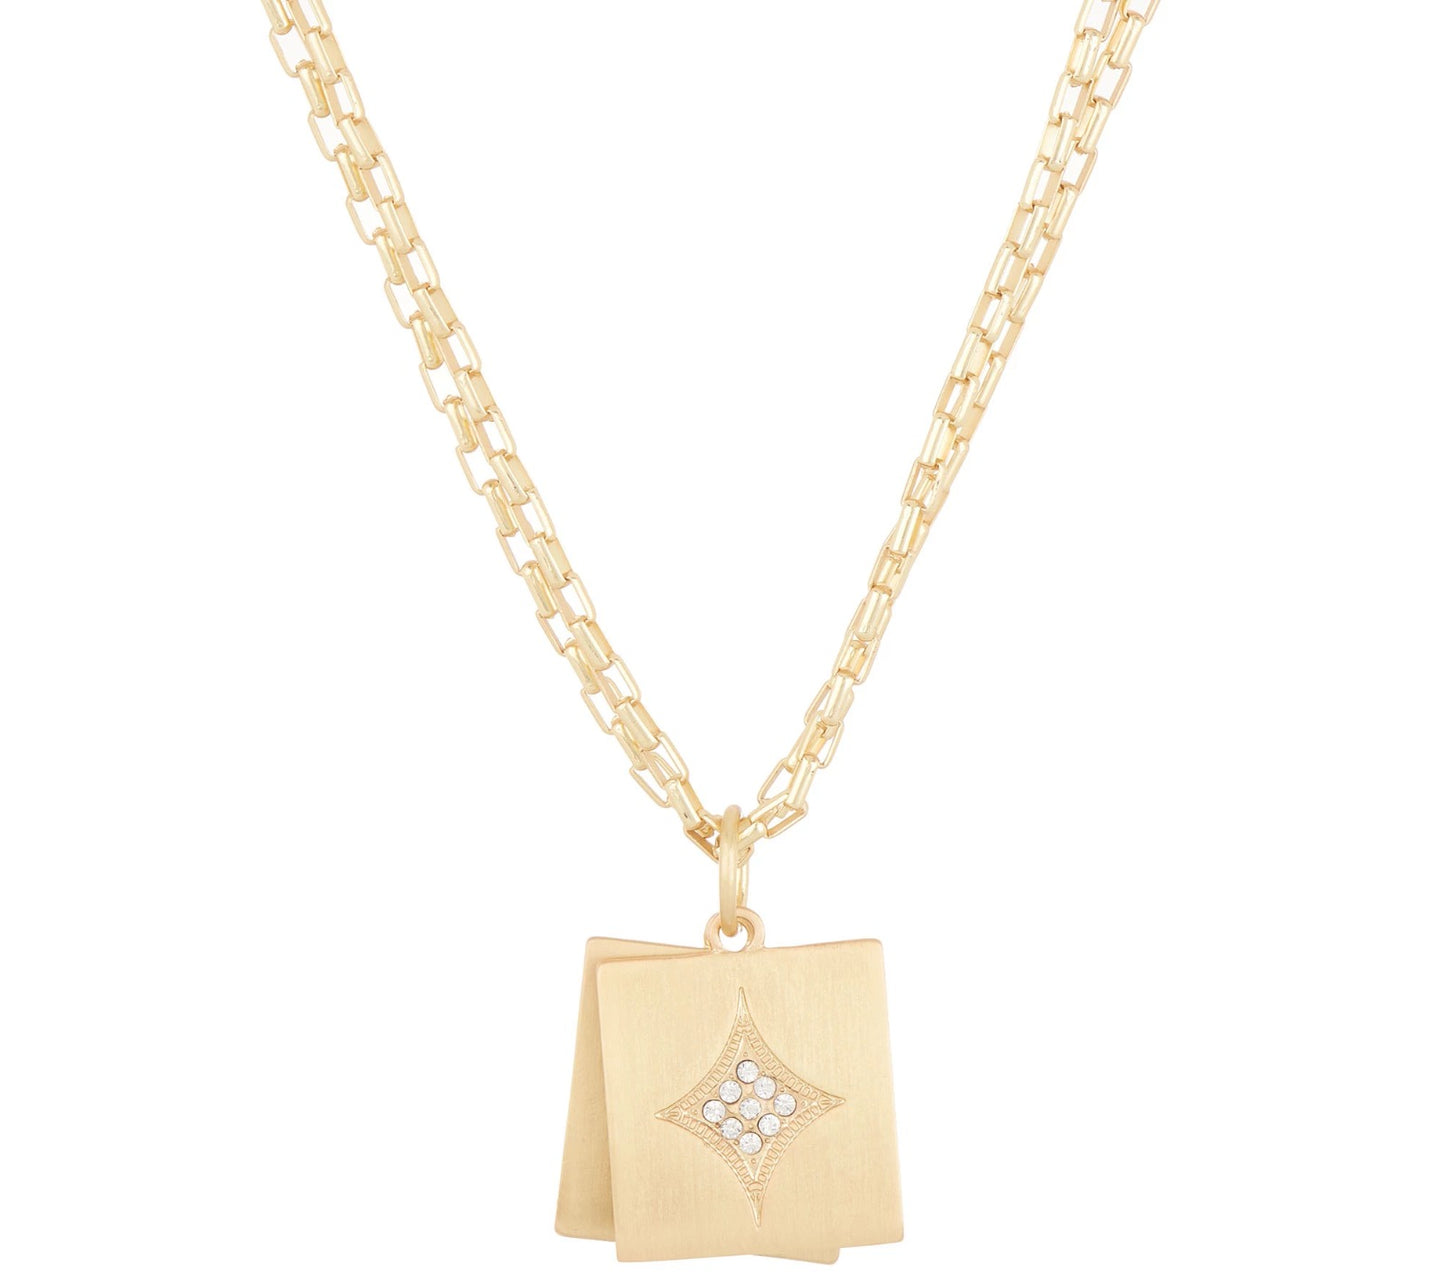 BROOKE SHIELDS Round Crystal Open Link Chain Charm Necklace, GoldTone, 20.5"